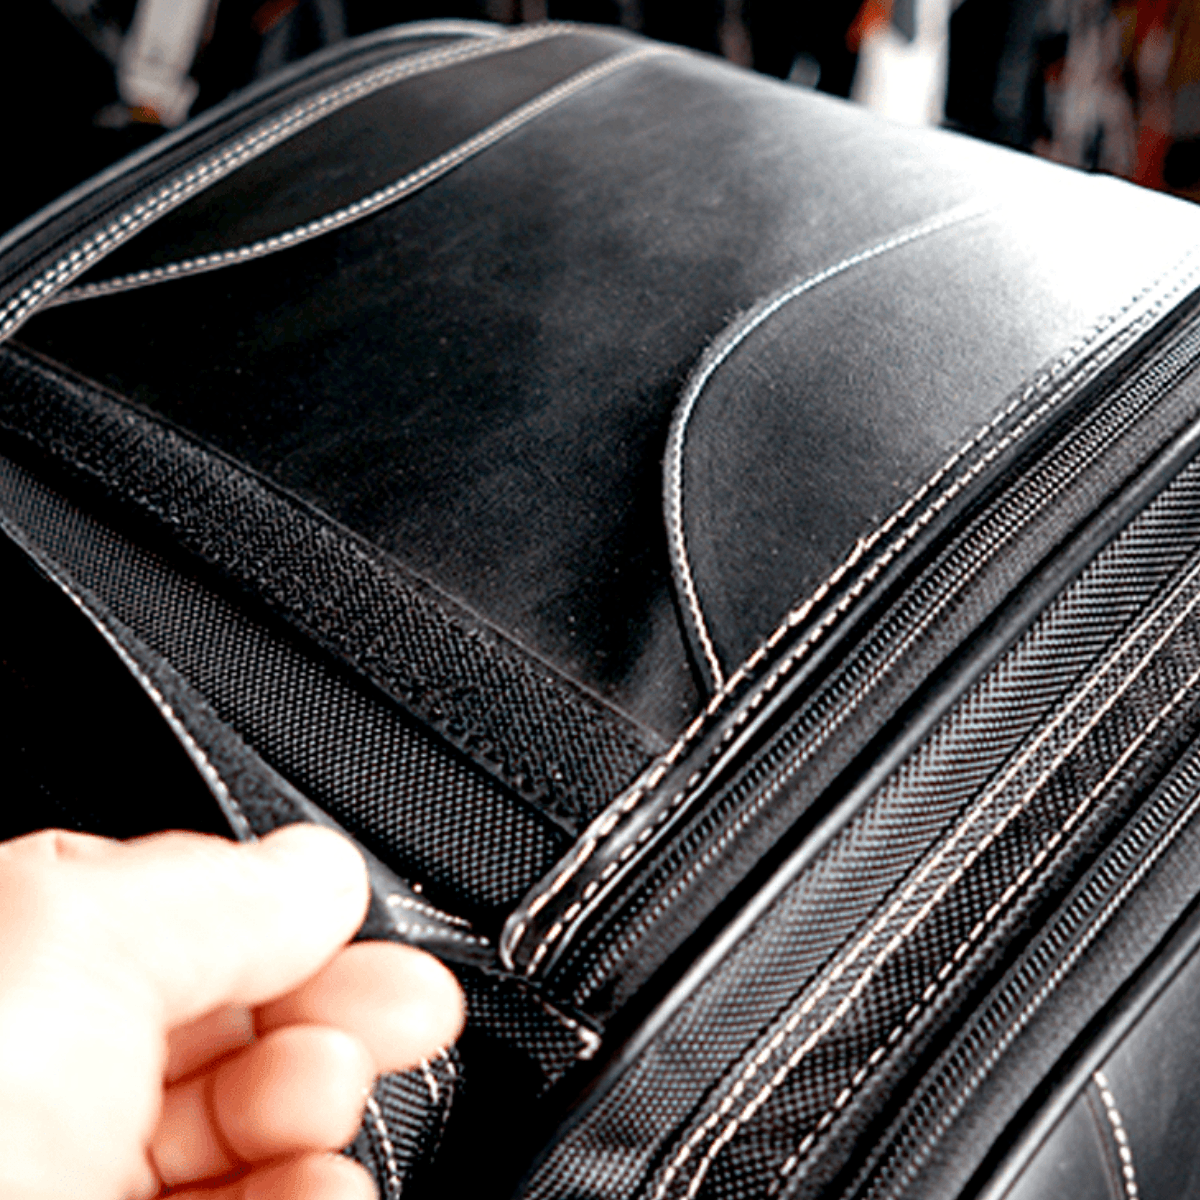 A person is opening the Universal Motorcycle Retro Tail Bag with Waterproof Cover made of waterproof leather and fiber material.